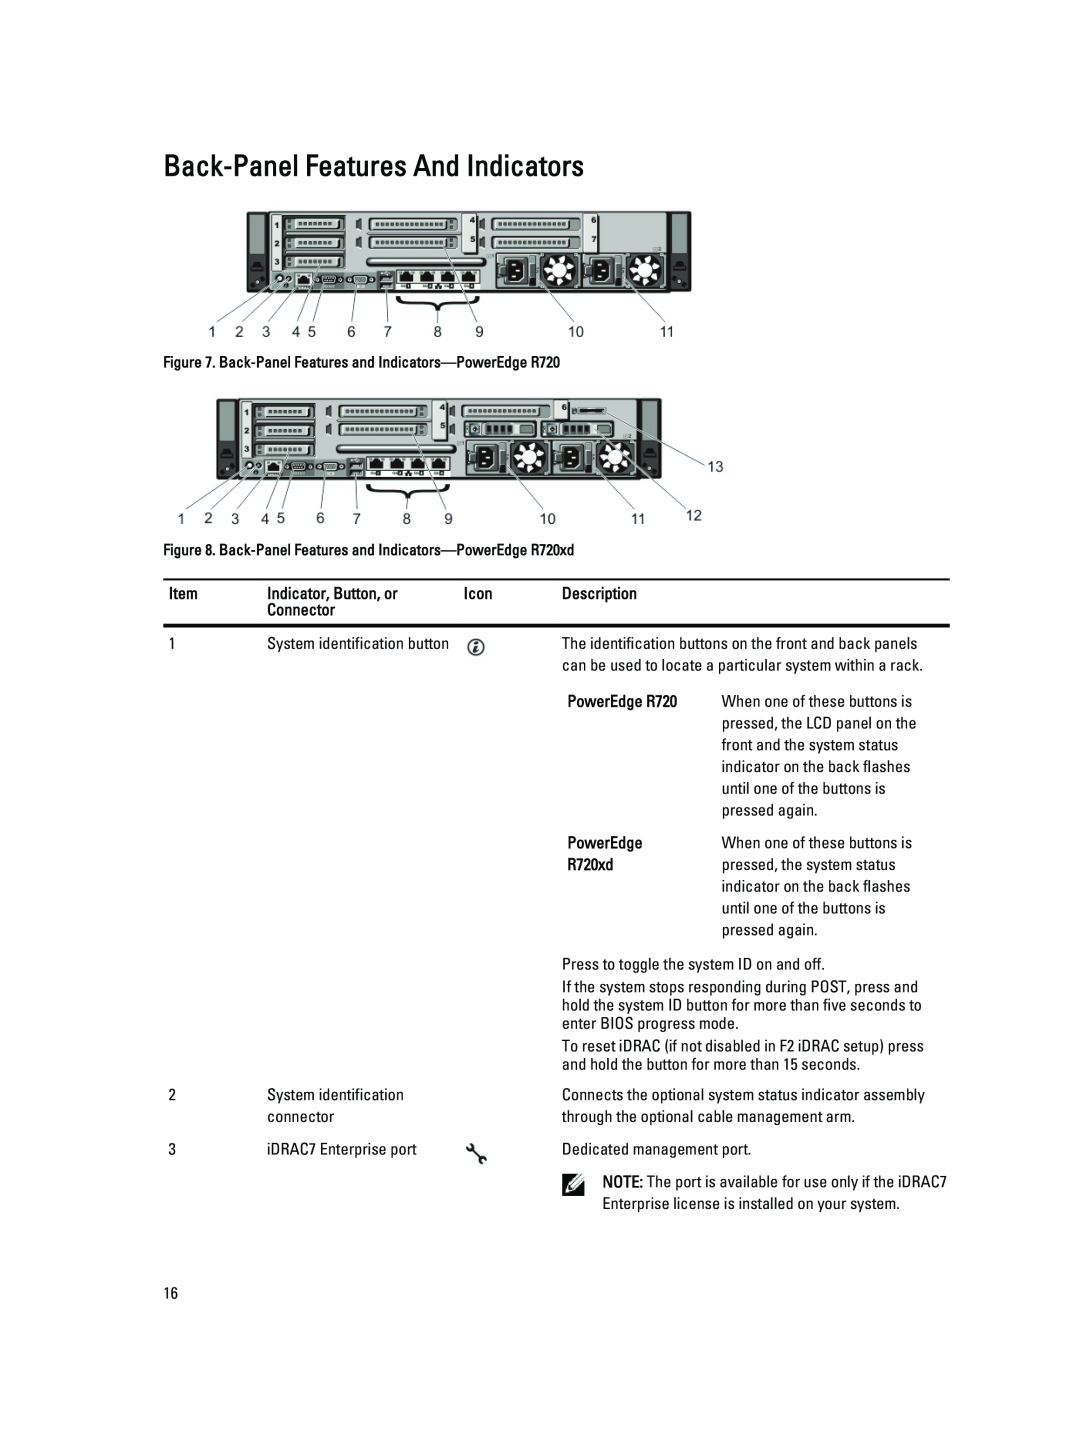 Dell Back-PanelFeatures And Indicators, Item, Indicator, Button, or, Icon, Description, Connector, PowerEdge R720 